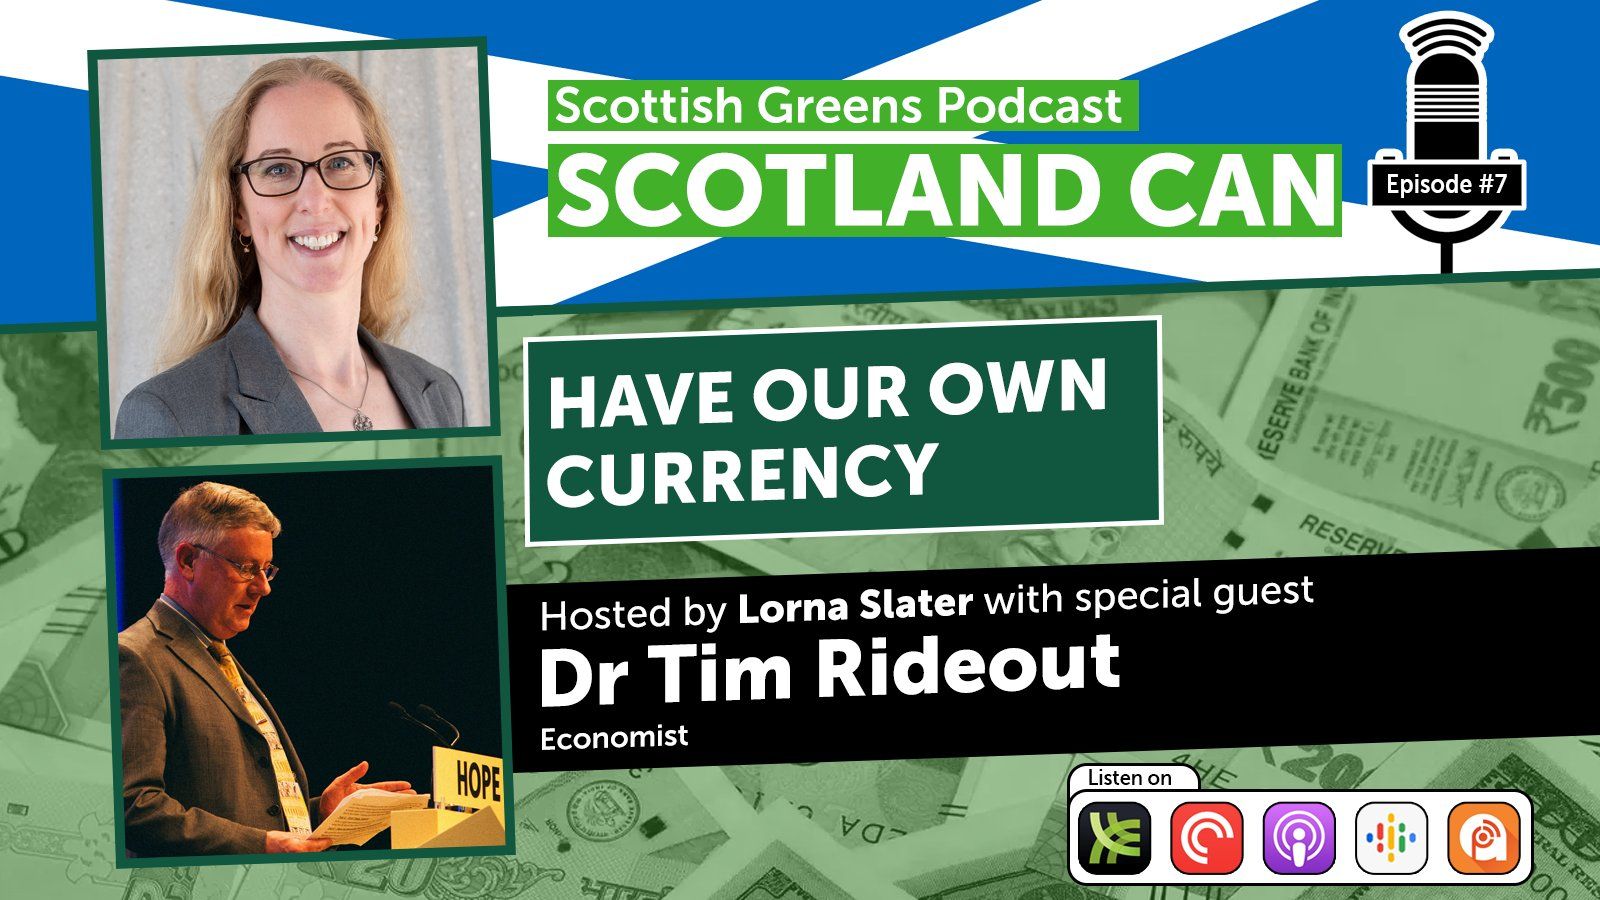 Link to Dr Tim Rideout's podcast for the Scottish Greens